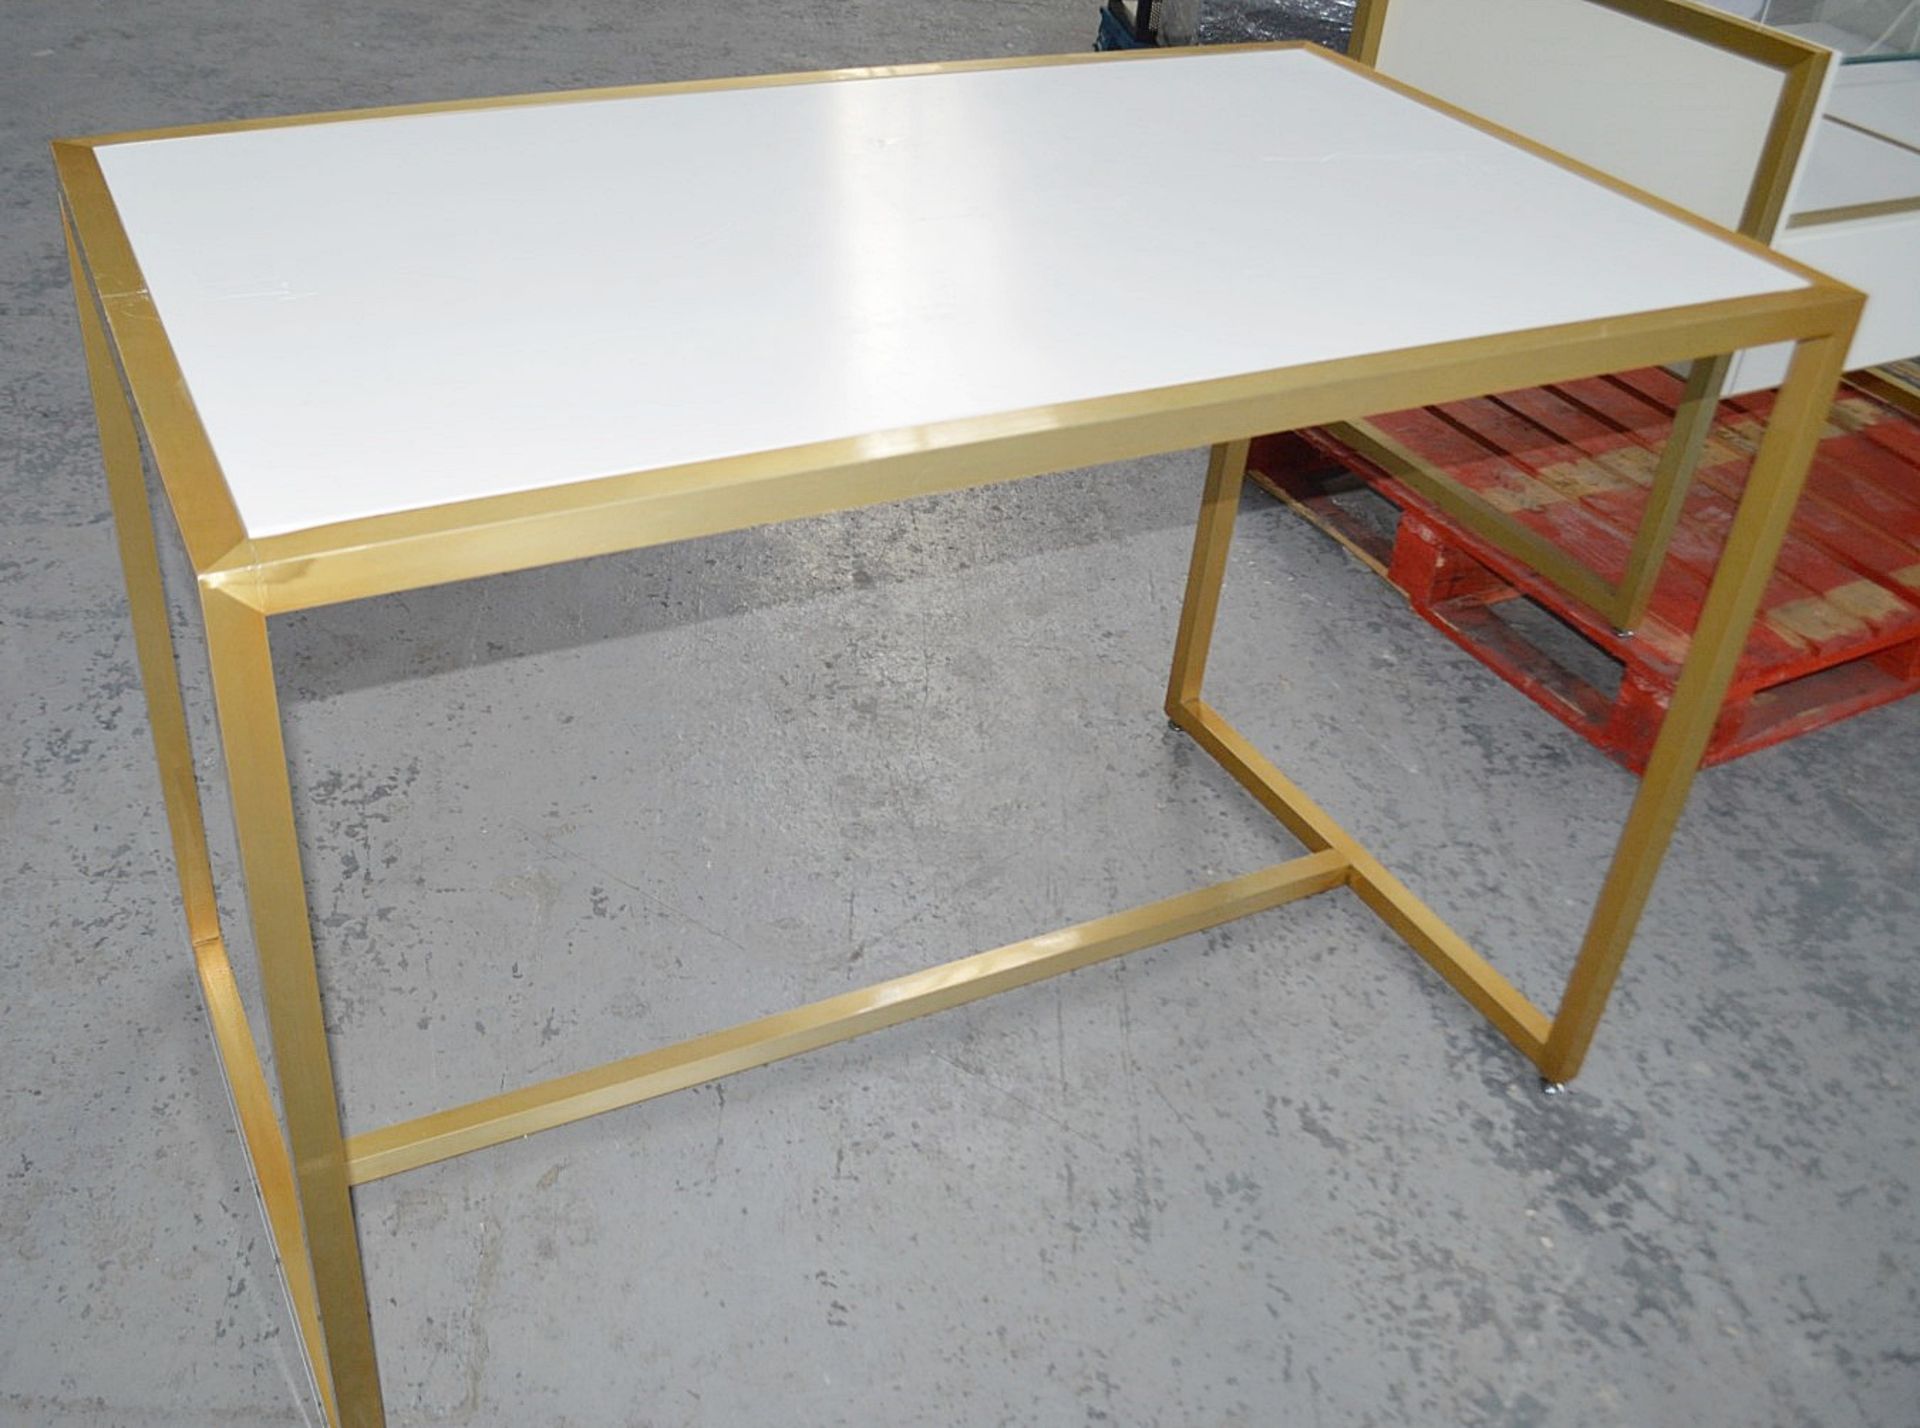 1 x High Display Table With A Sturdy Metal Base In Gold - Dimensions: H92 x W130 x D75cm - Image 2 of 4